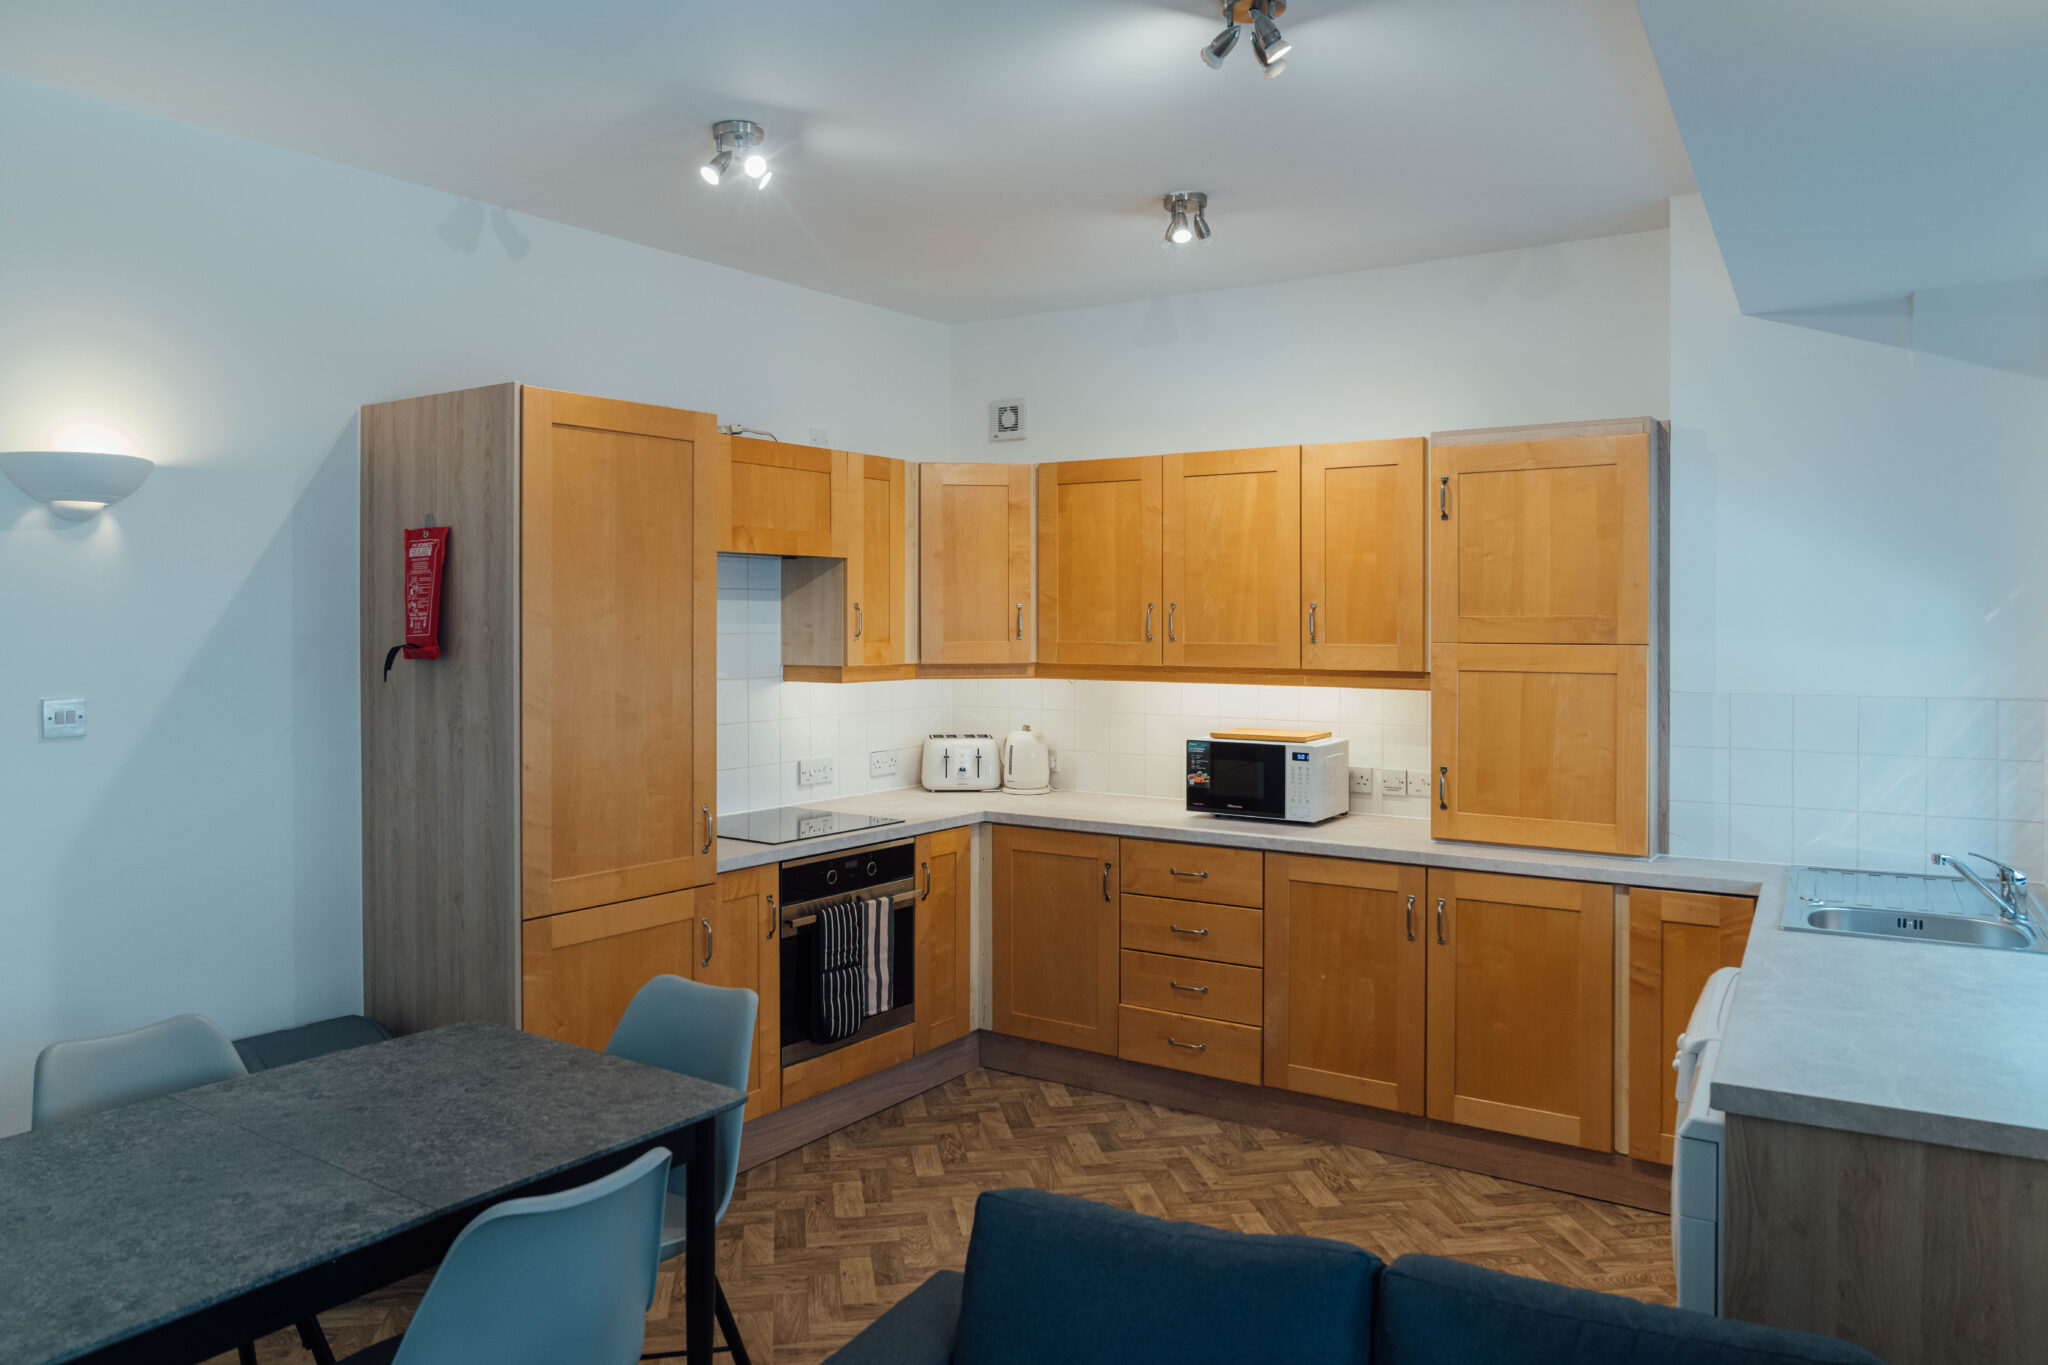 Student housing kitchen in central london